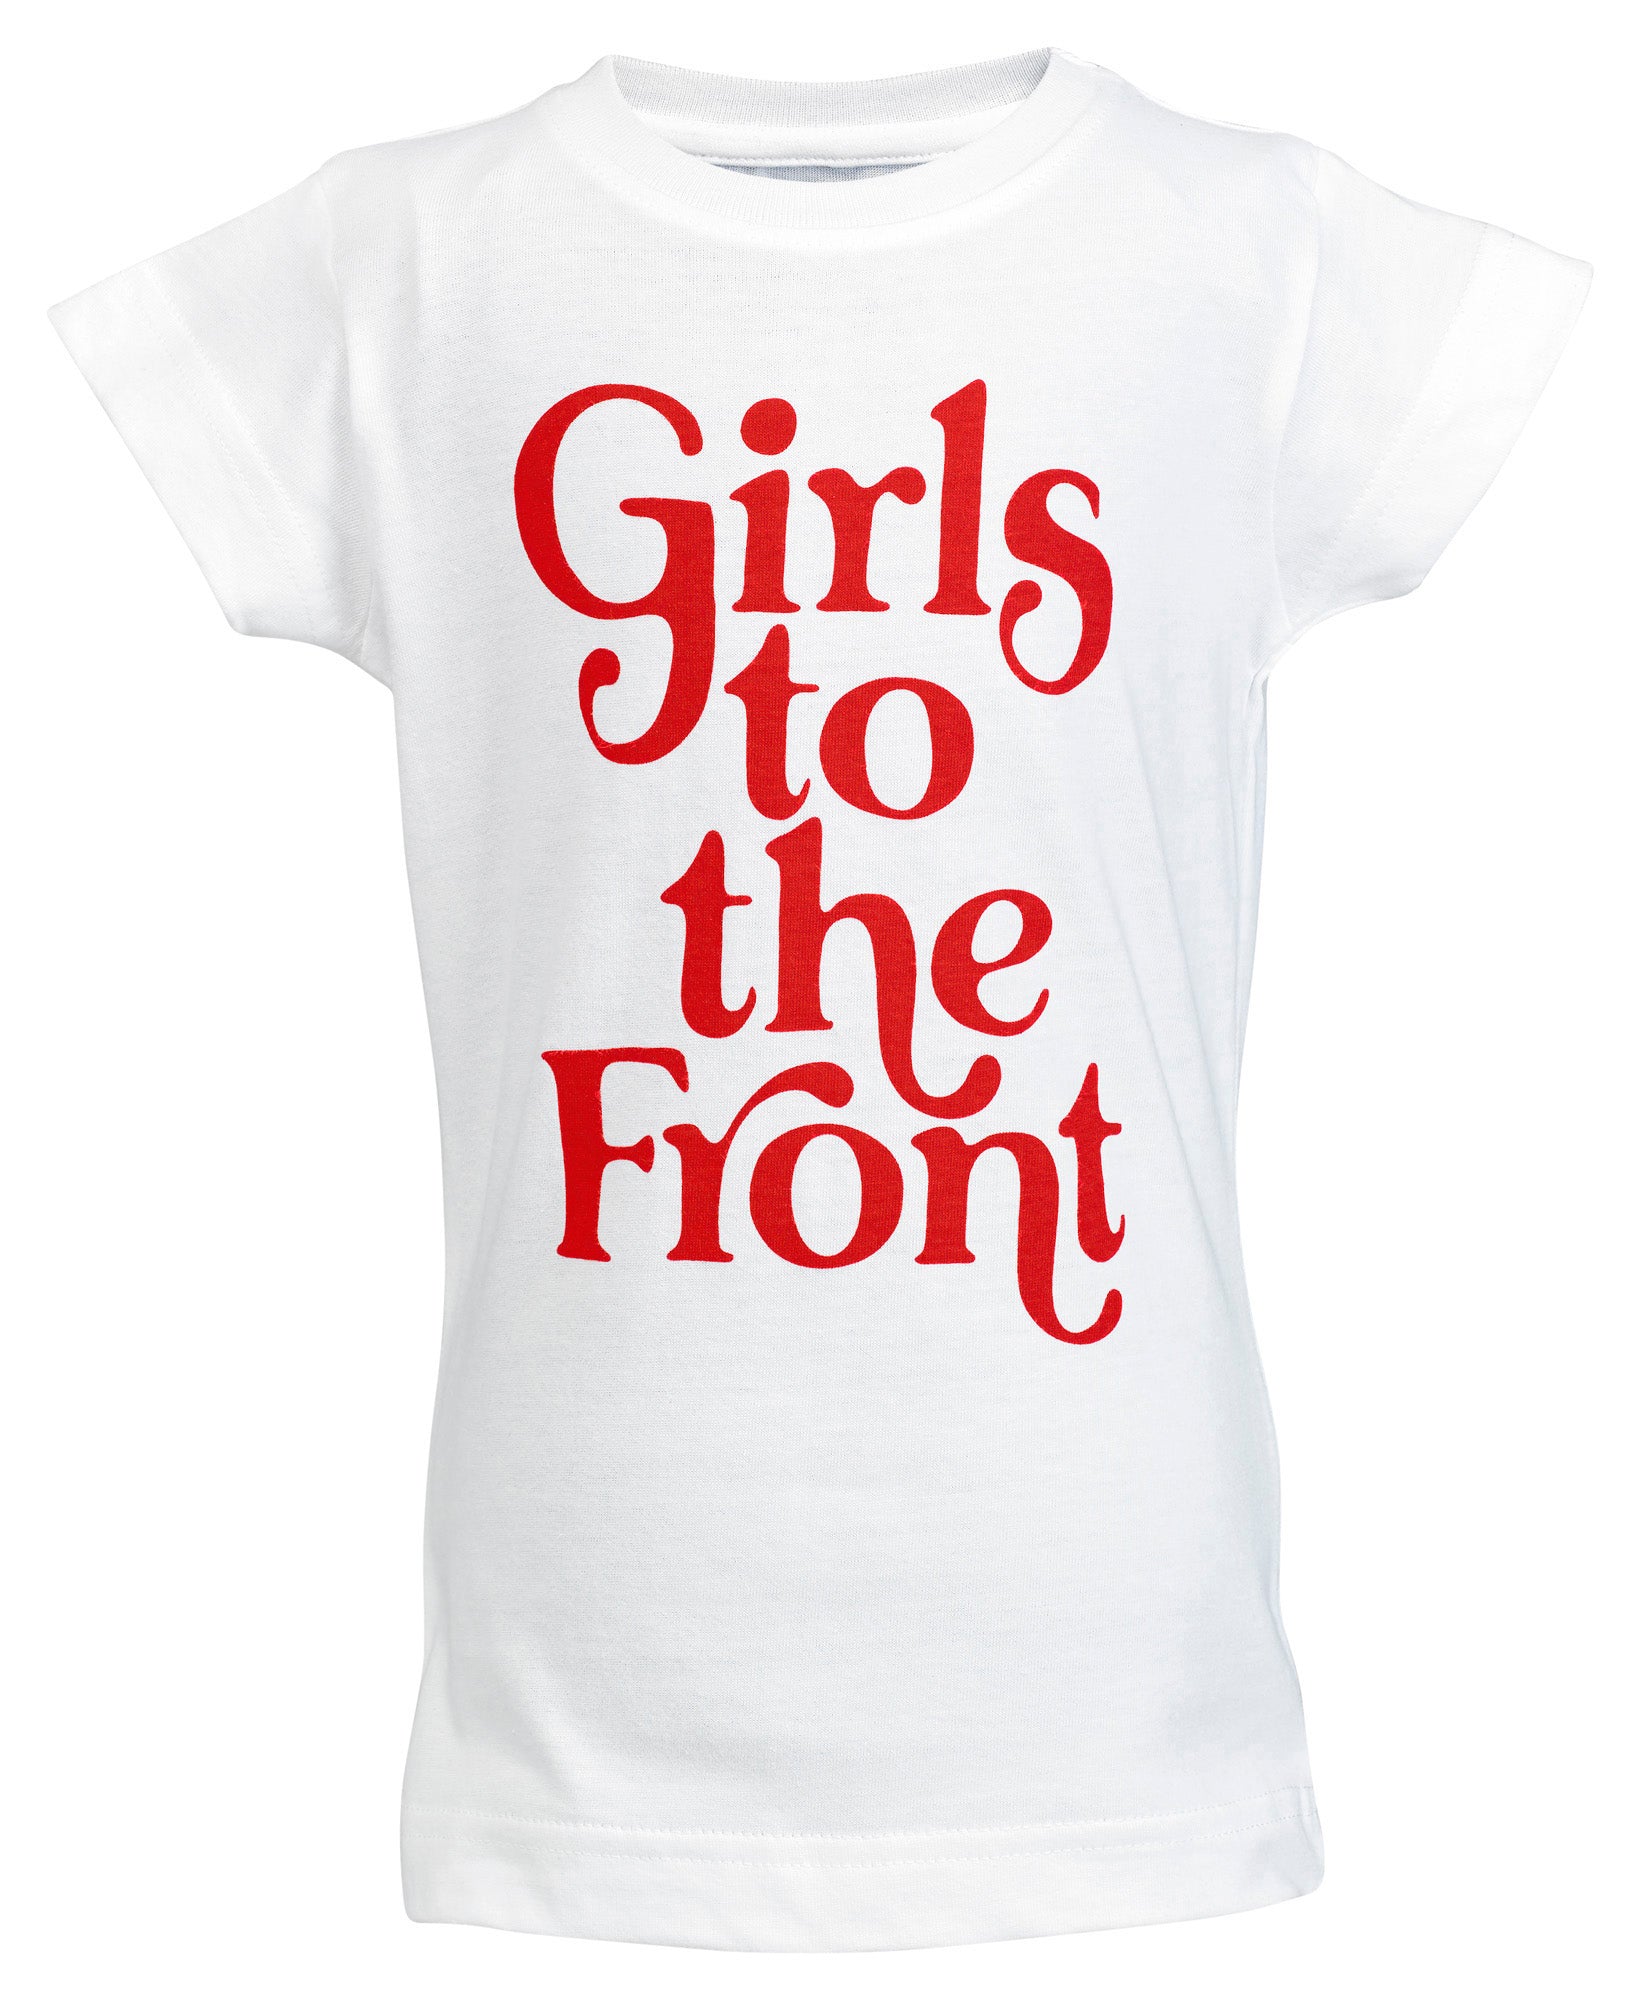 Girls to the Front Toddler Graphic Tee - White